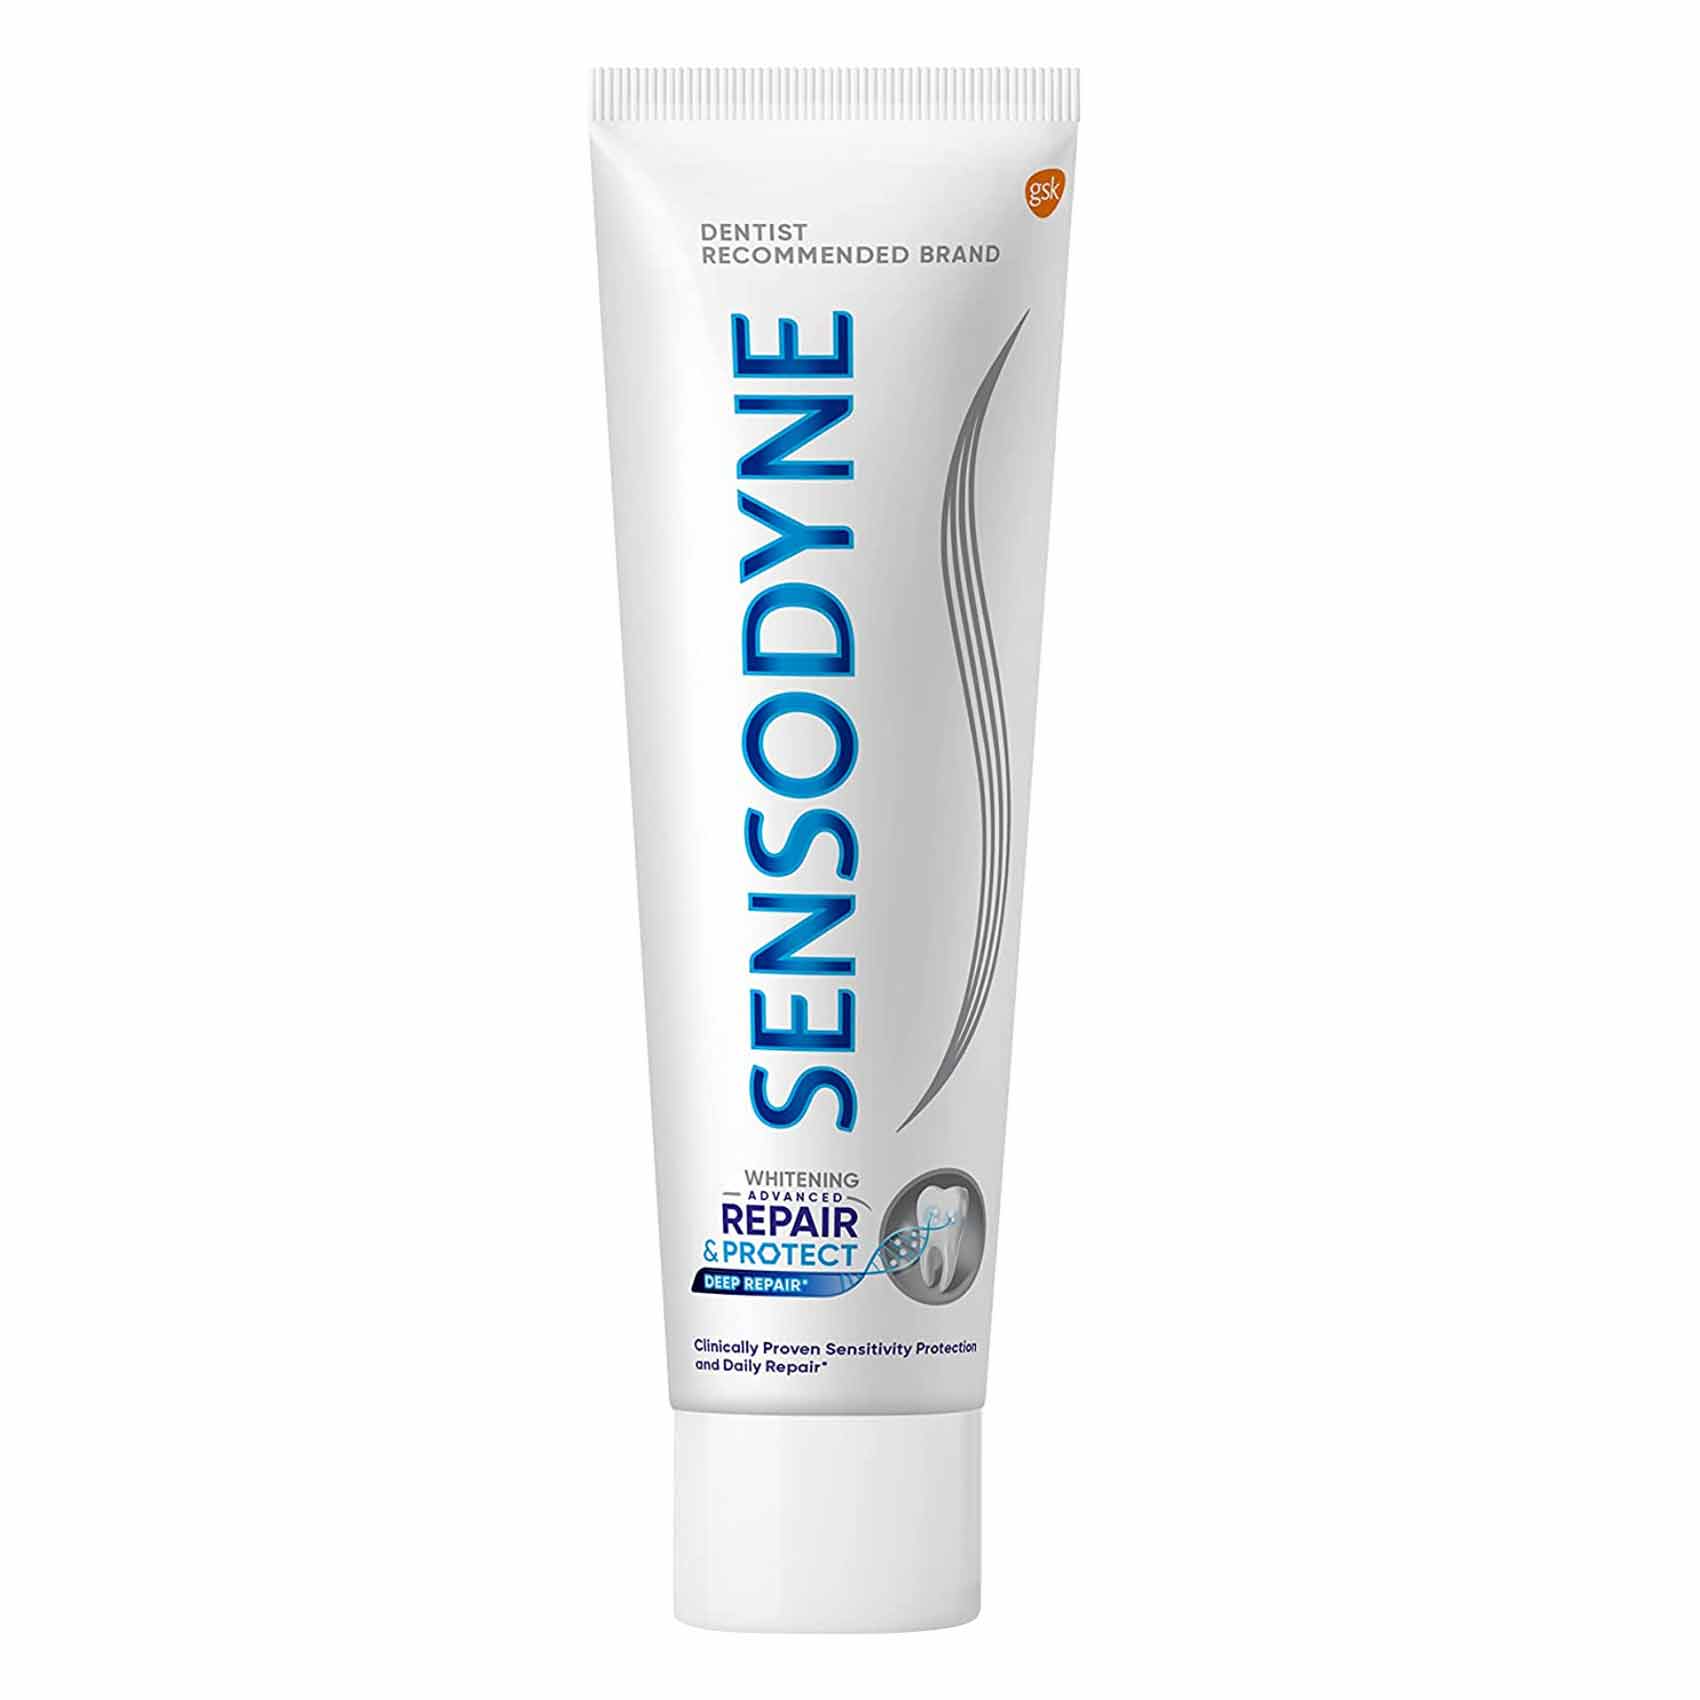 Sensodyne Advanced Repair And Protect Whitening Toothpaste 75ml